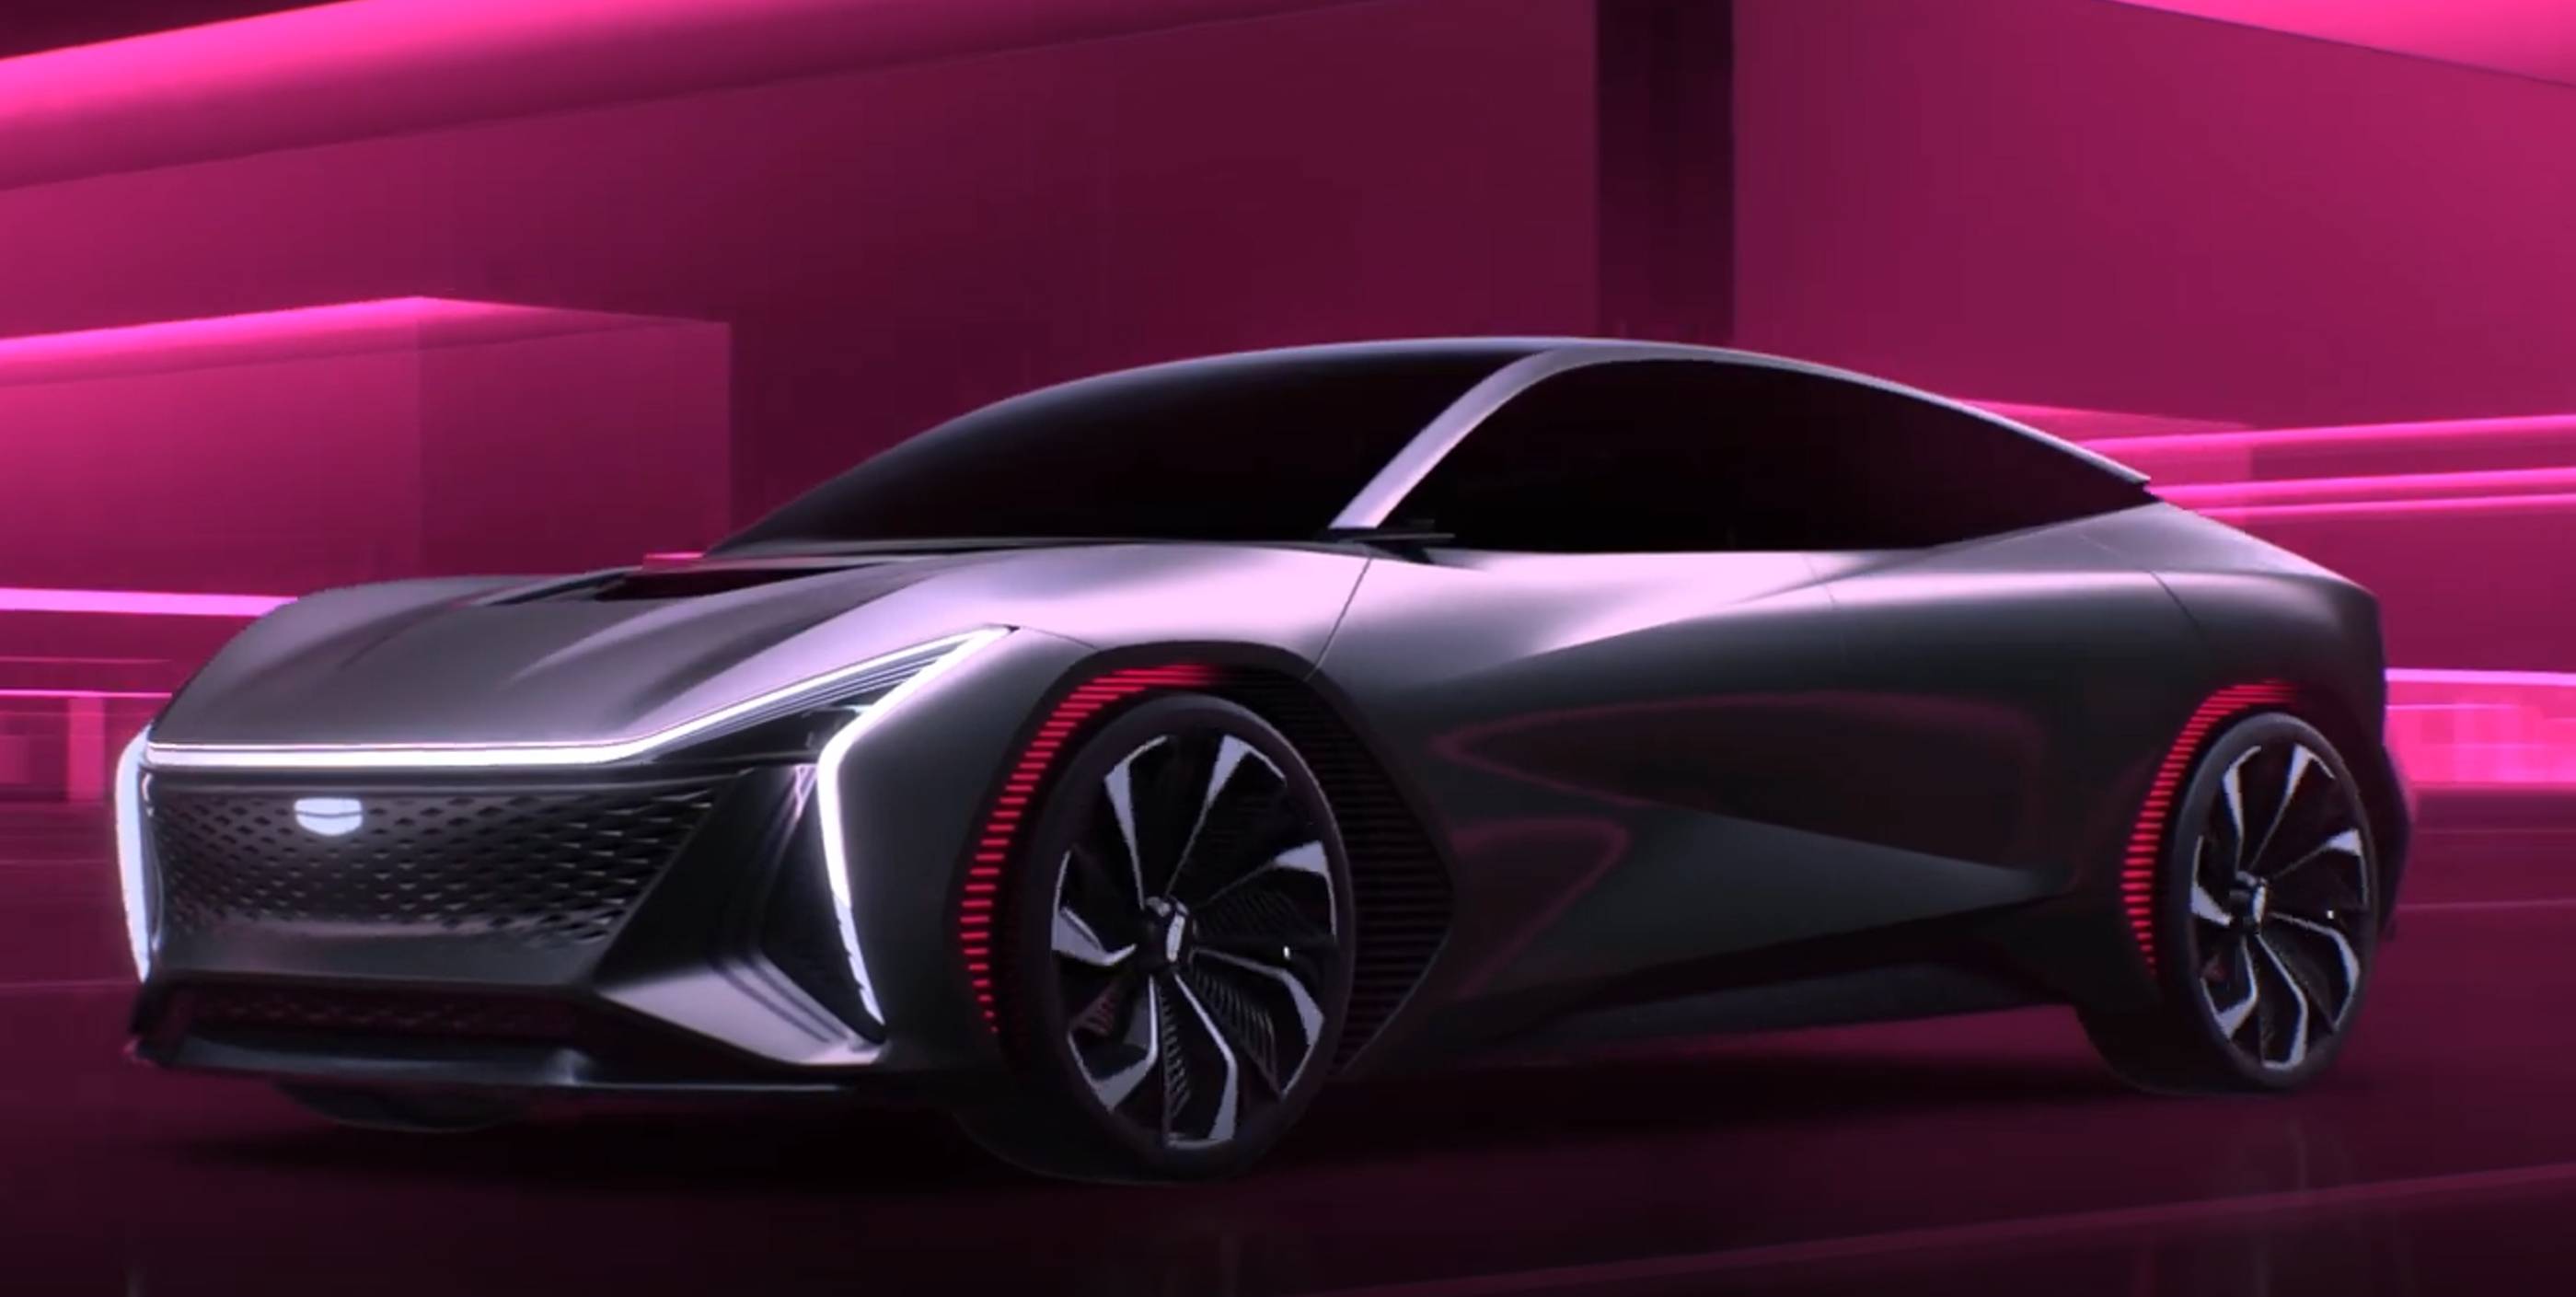 Geely_Auto_Concept_Car_Vision_Starburst_World_Reveal